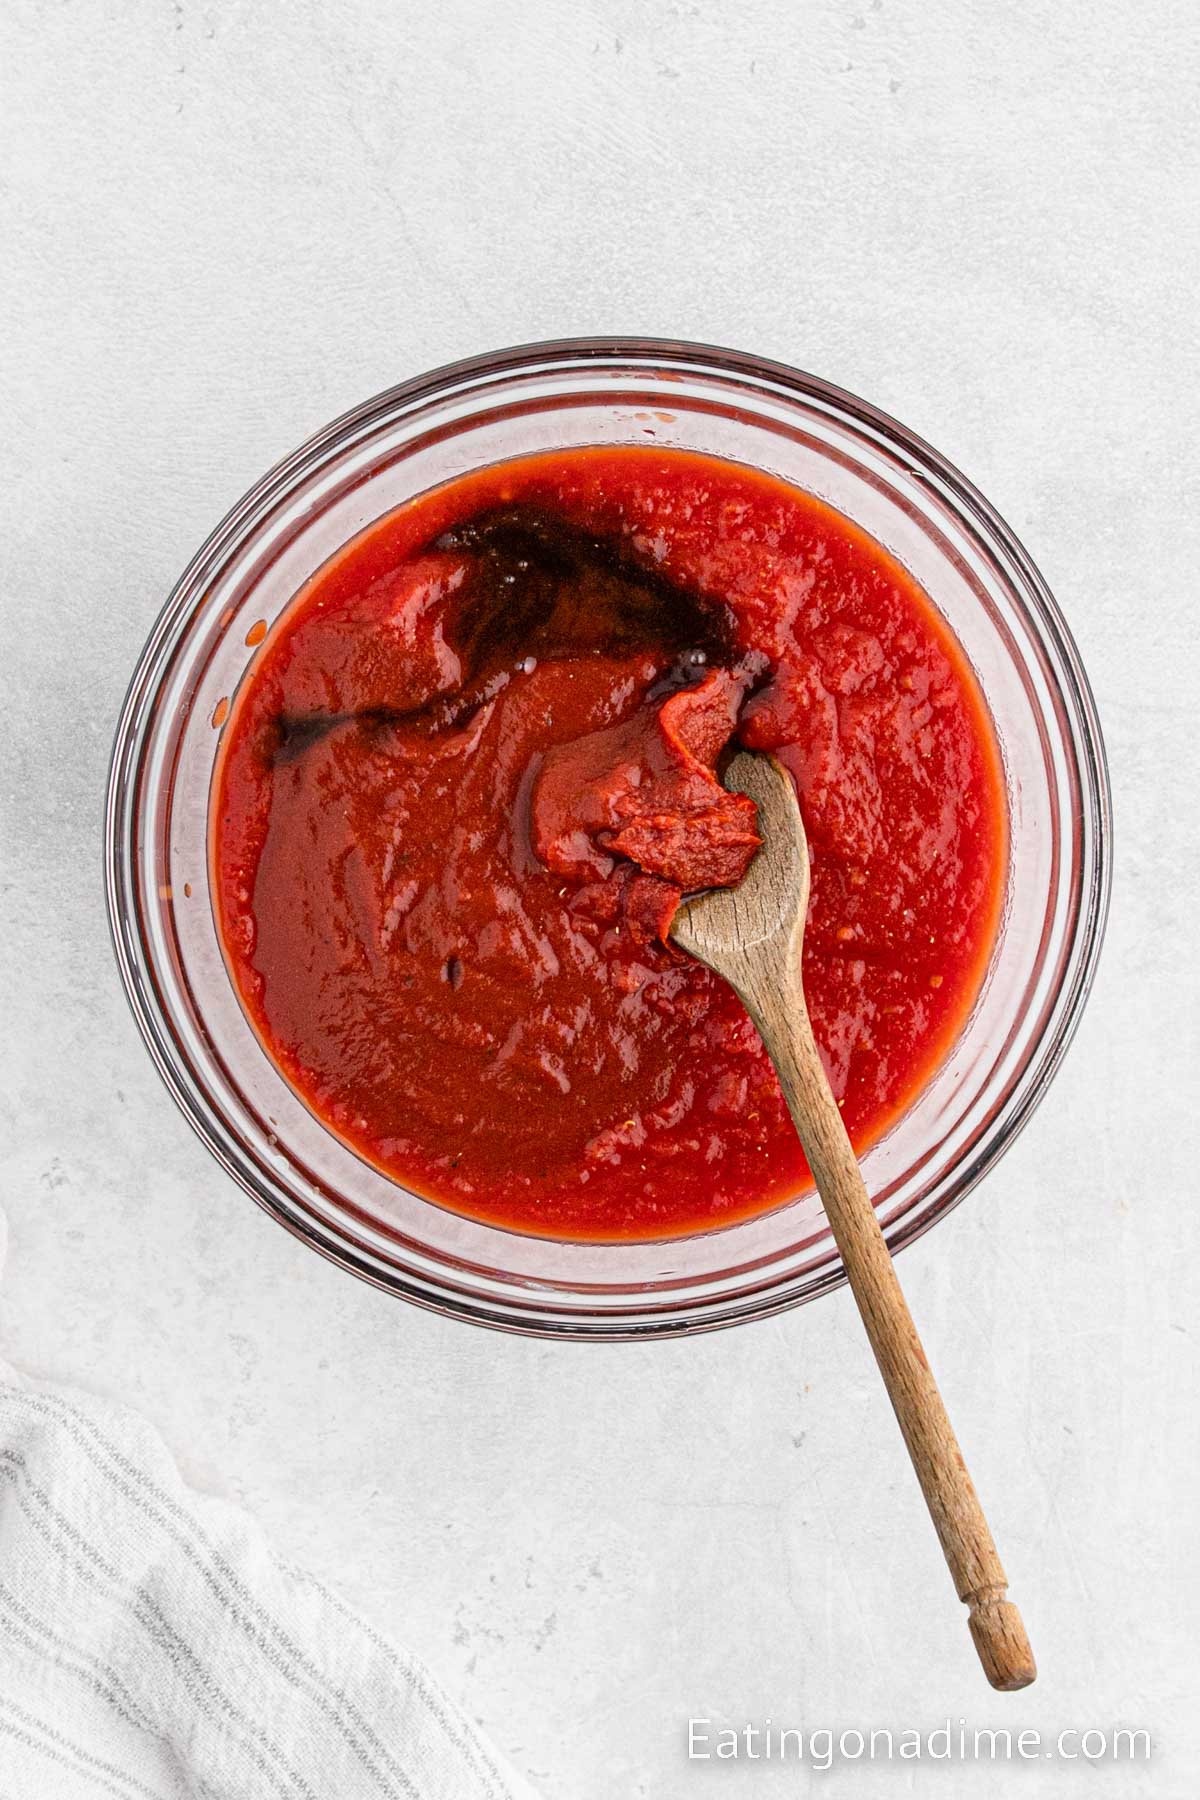 Mixing the sauce in a bowl with a wooden spoon